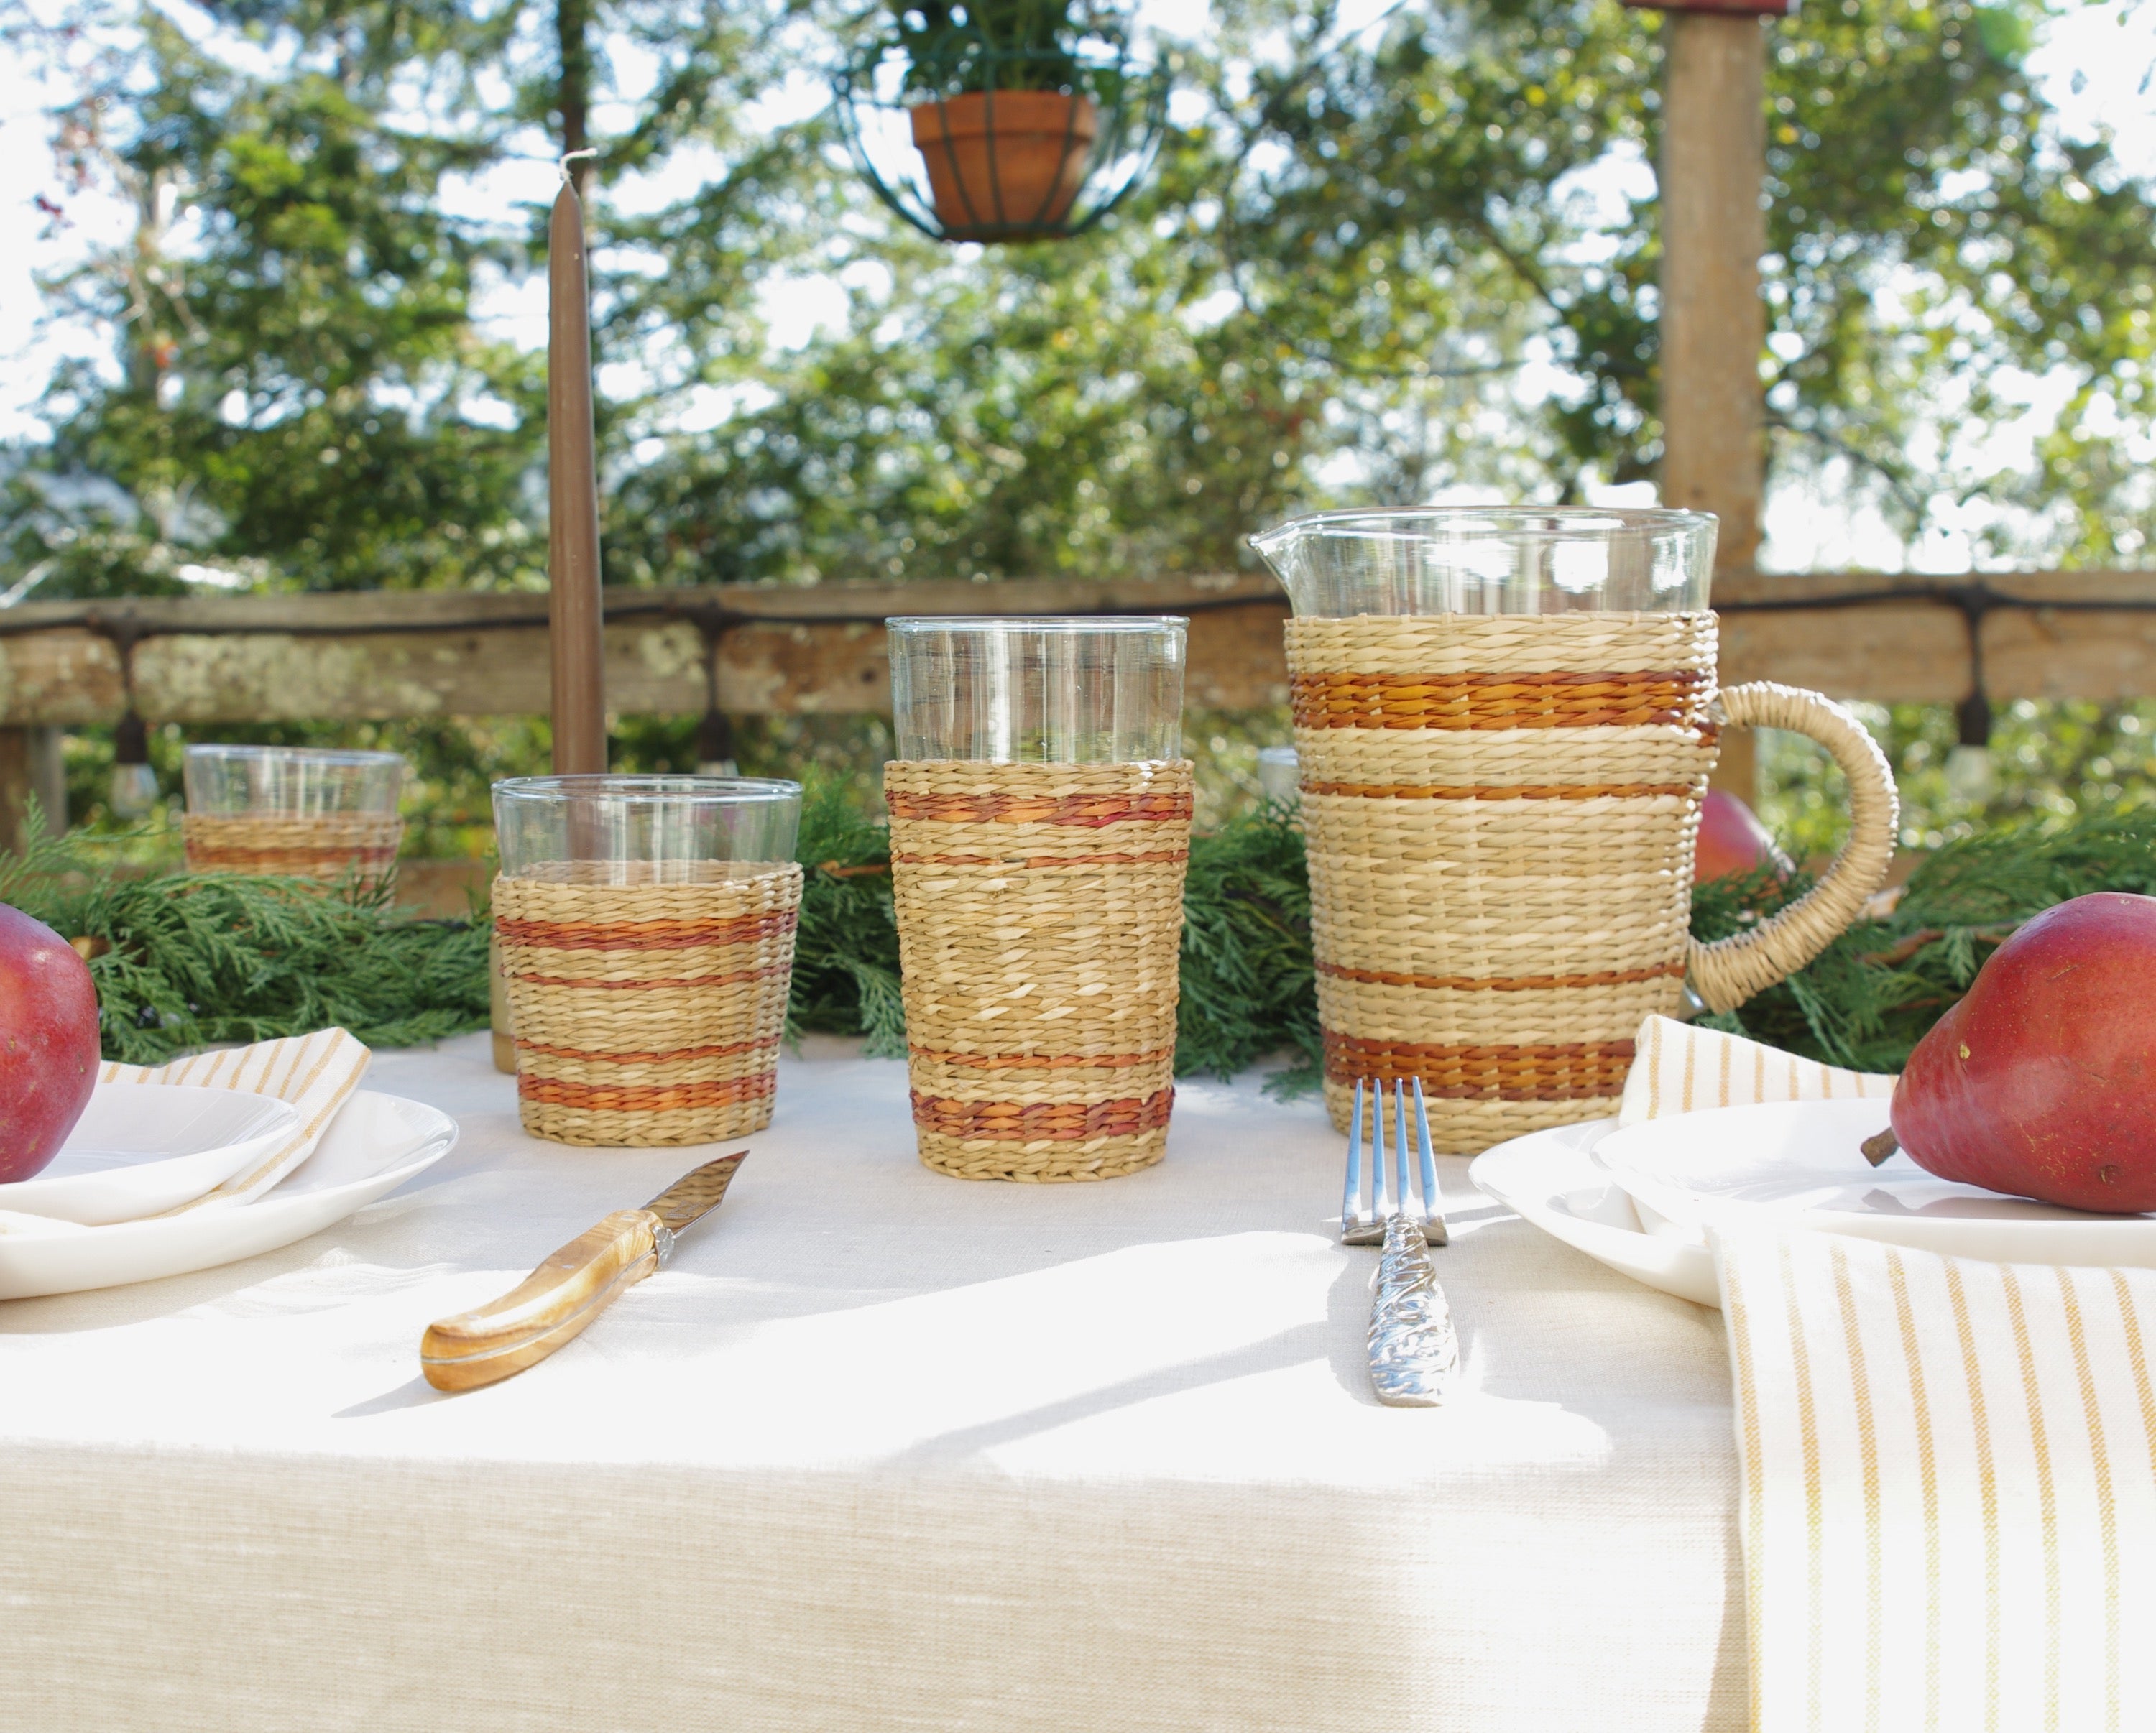 Brown Striped Seagrass Wide Tumbler (Now 25% off!) Glass Seagrass Brand_Seagrass & Rattan Kitchen_Drinkware lm New Arrivals Seagrass Summer Clean Up summer sale Tumblers & Highballs 6AC34968-E947-4DA9-A900-893EDF9B3D0B